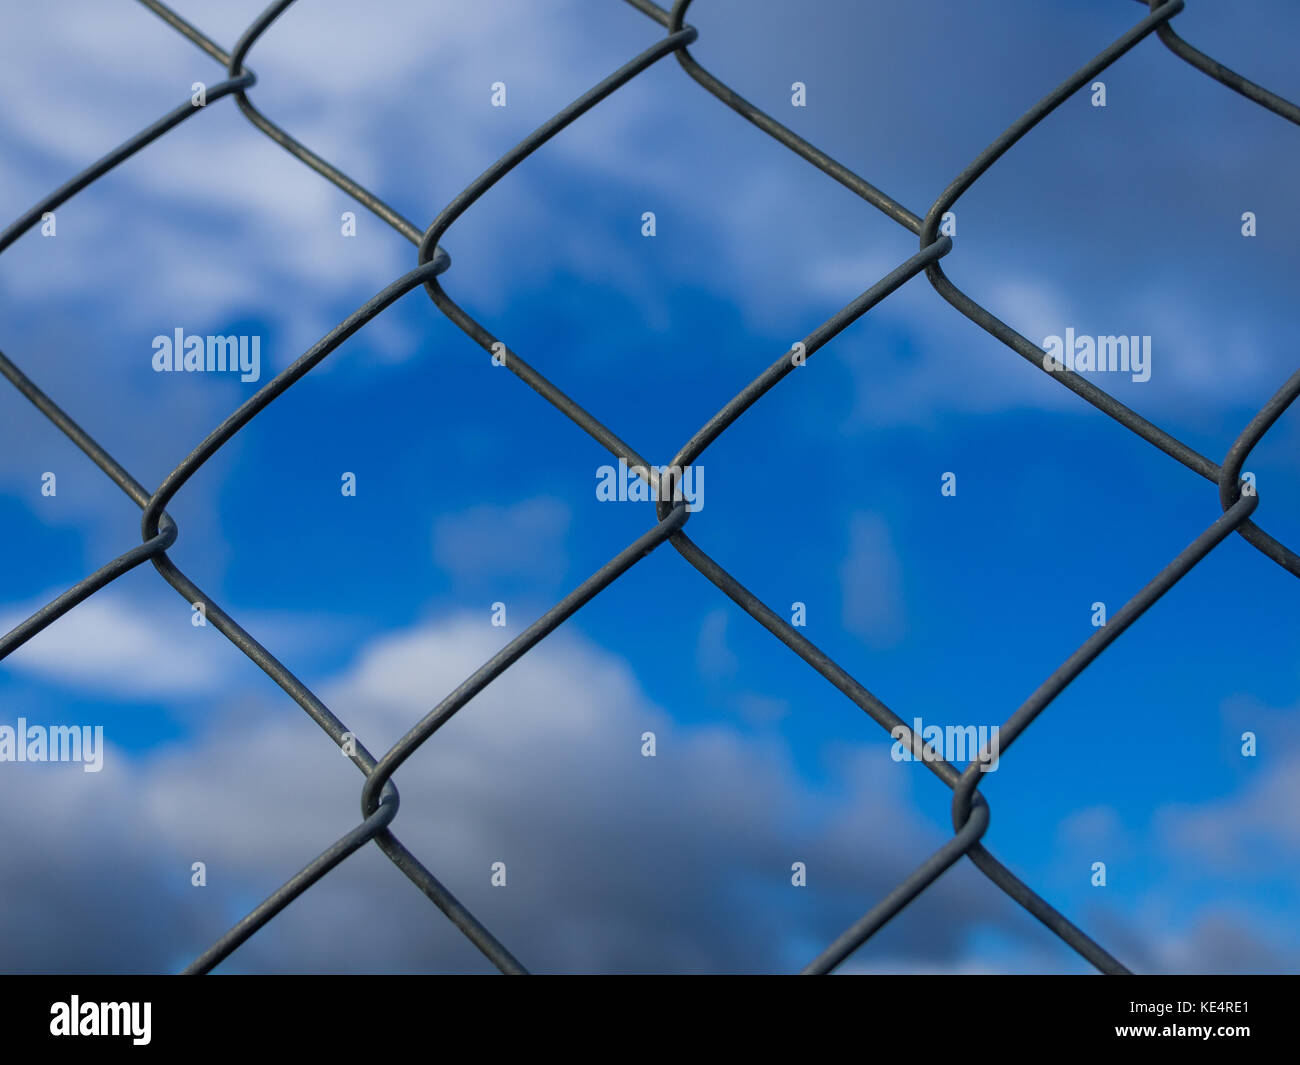 Closeup of metal fence with square units in front of dramatic blue cloudy sky. Stock Photo